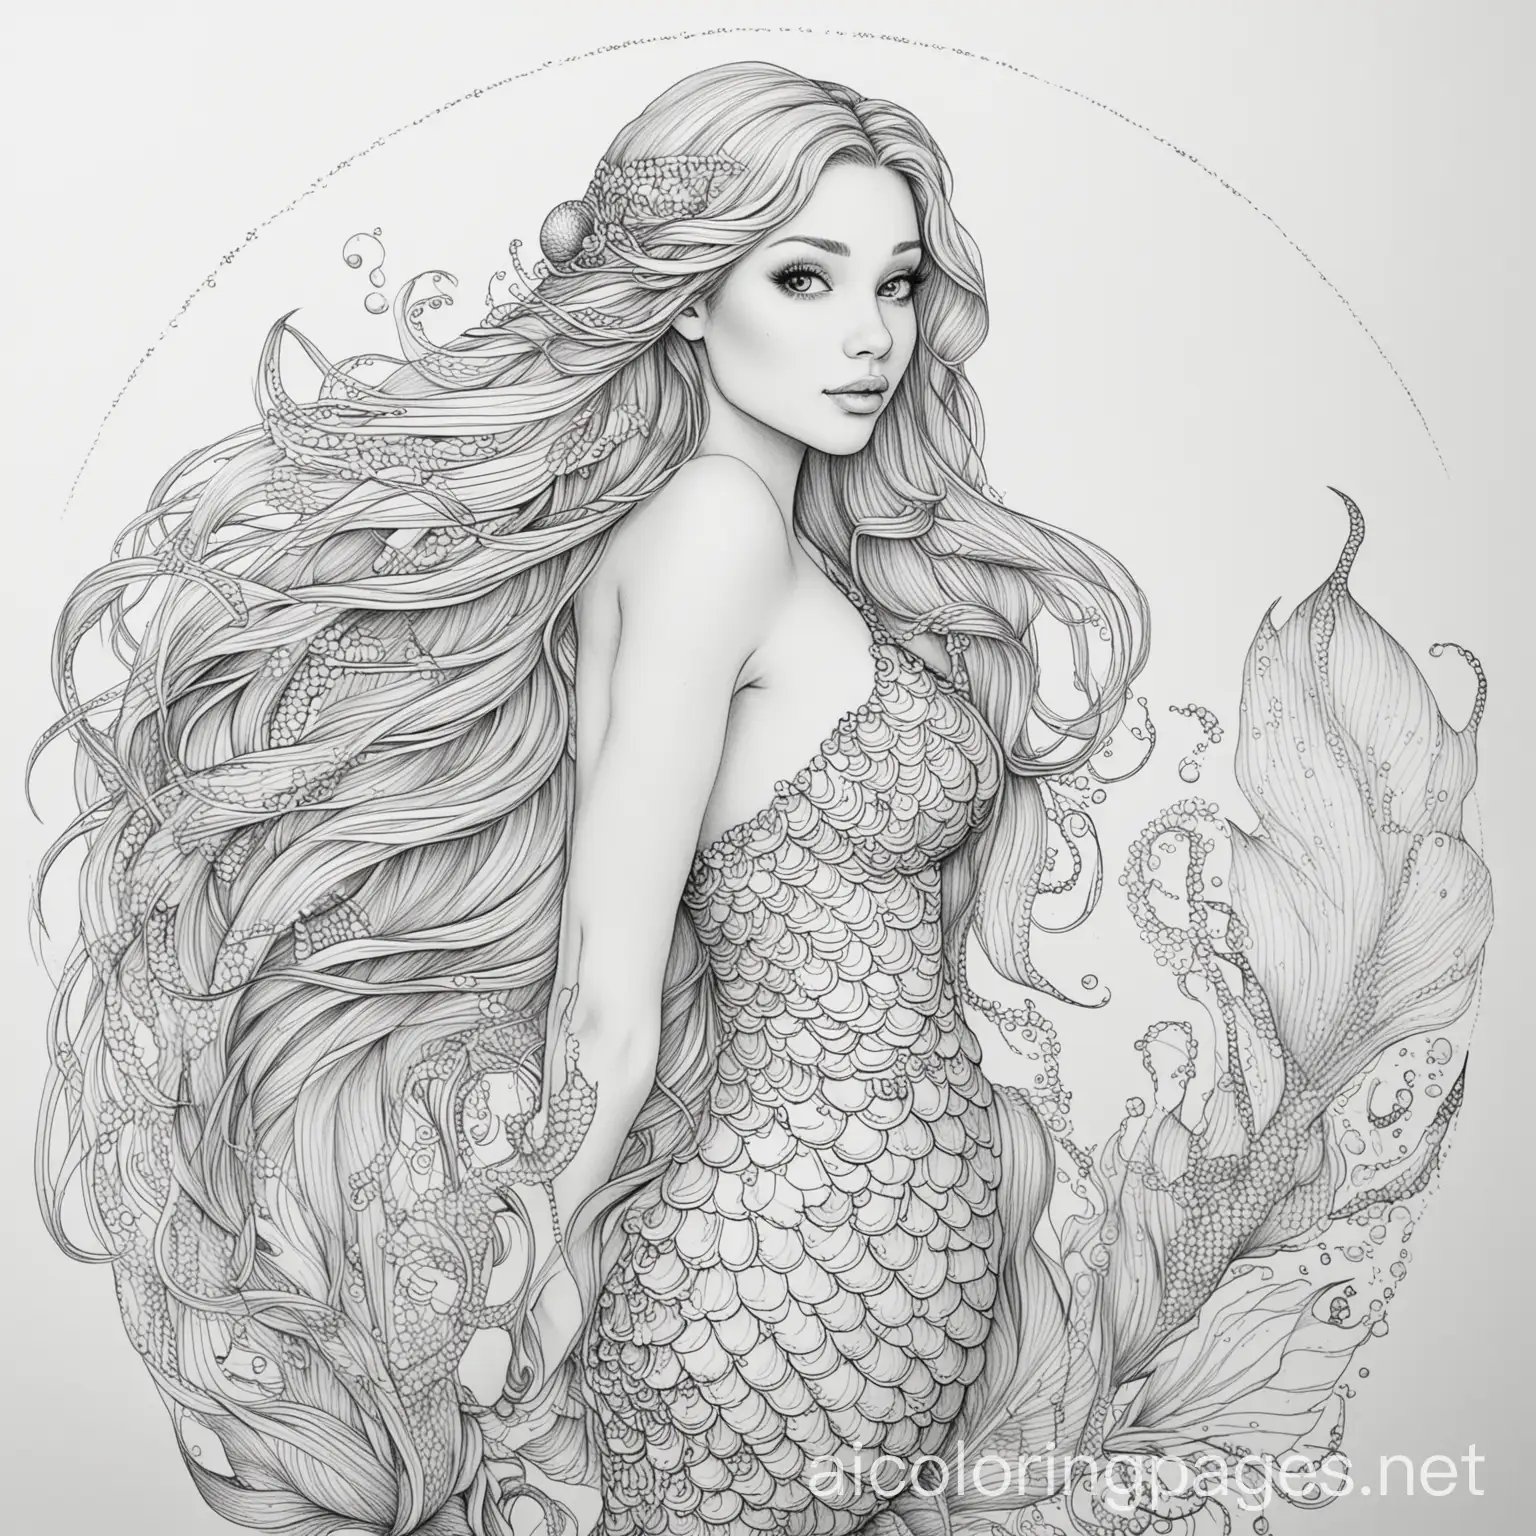 Mermaid-Coloring-Page-in-Black-and-White-with-Simplicity-and-Ample-White-Space